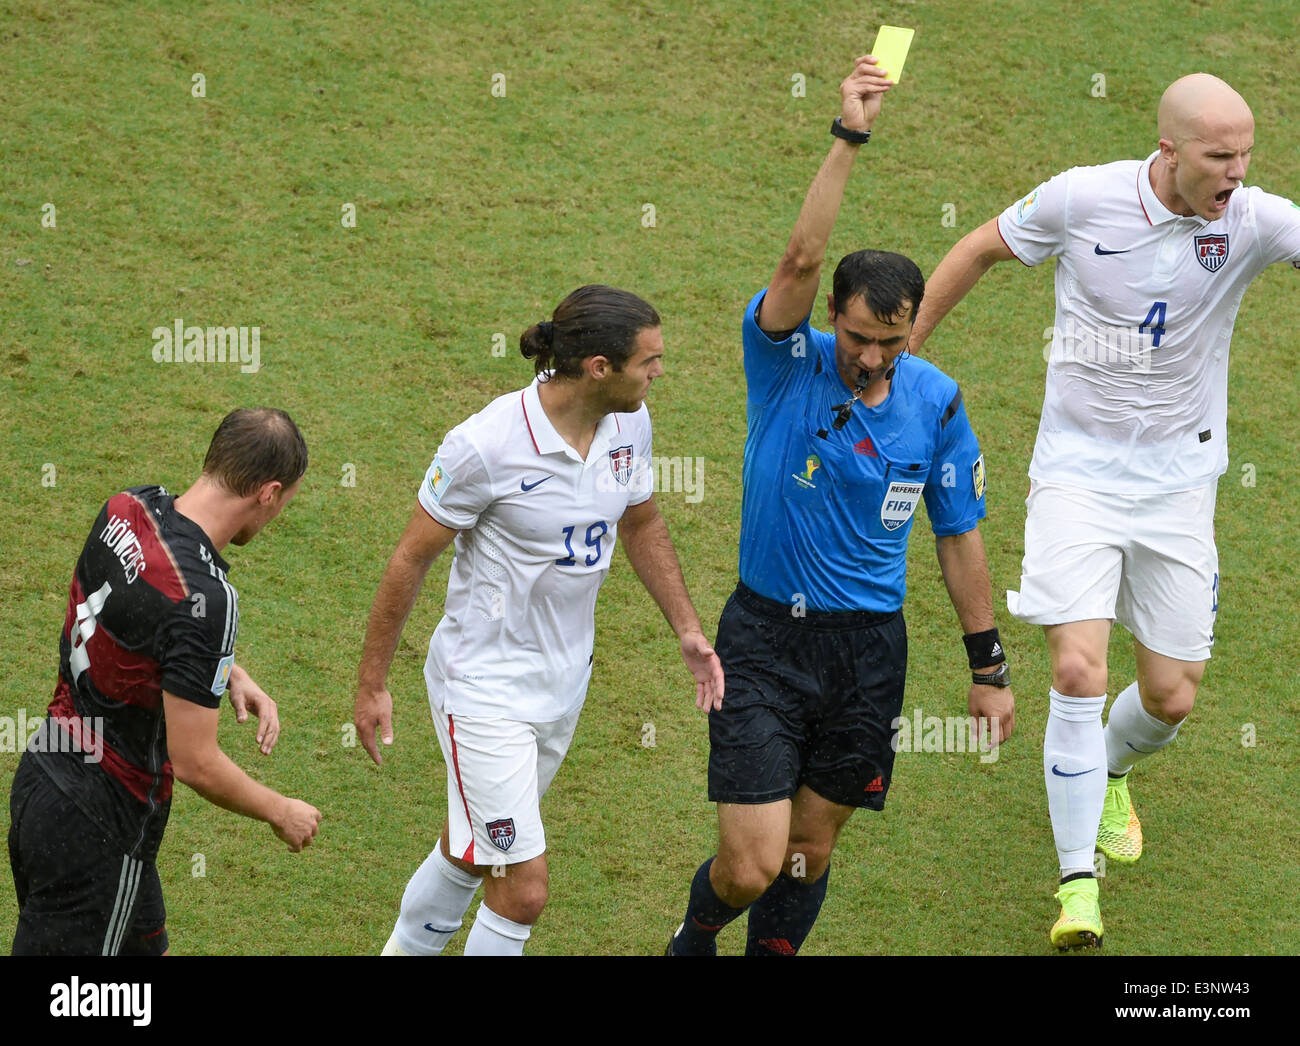 Recife, Brazil. 26th June, 2014. Referee Ravshan Irmatov shows a yellow card to Benedikt Hoewedes (L) of Germany during the FIFA World Cup group G preliminary round match between the USA and Germany at the Arena Pernambuco in Recife, Brazil, 26 June 2014. Photo: Andreas Gebert/dpa/Alamy Live News Stock Photo